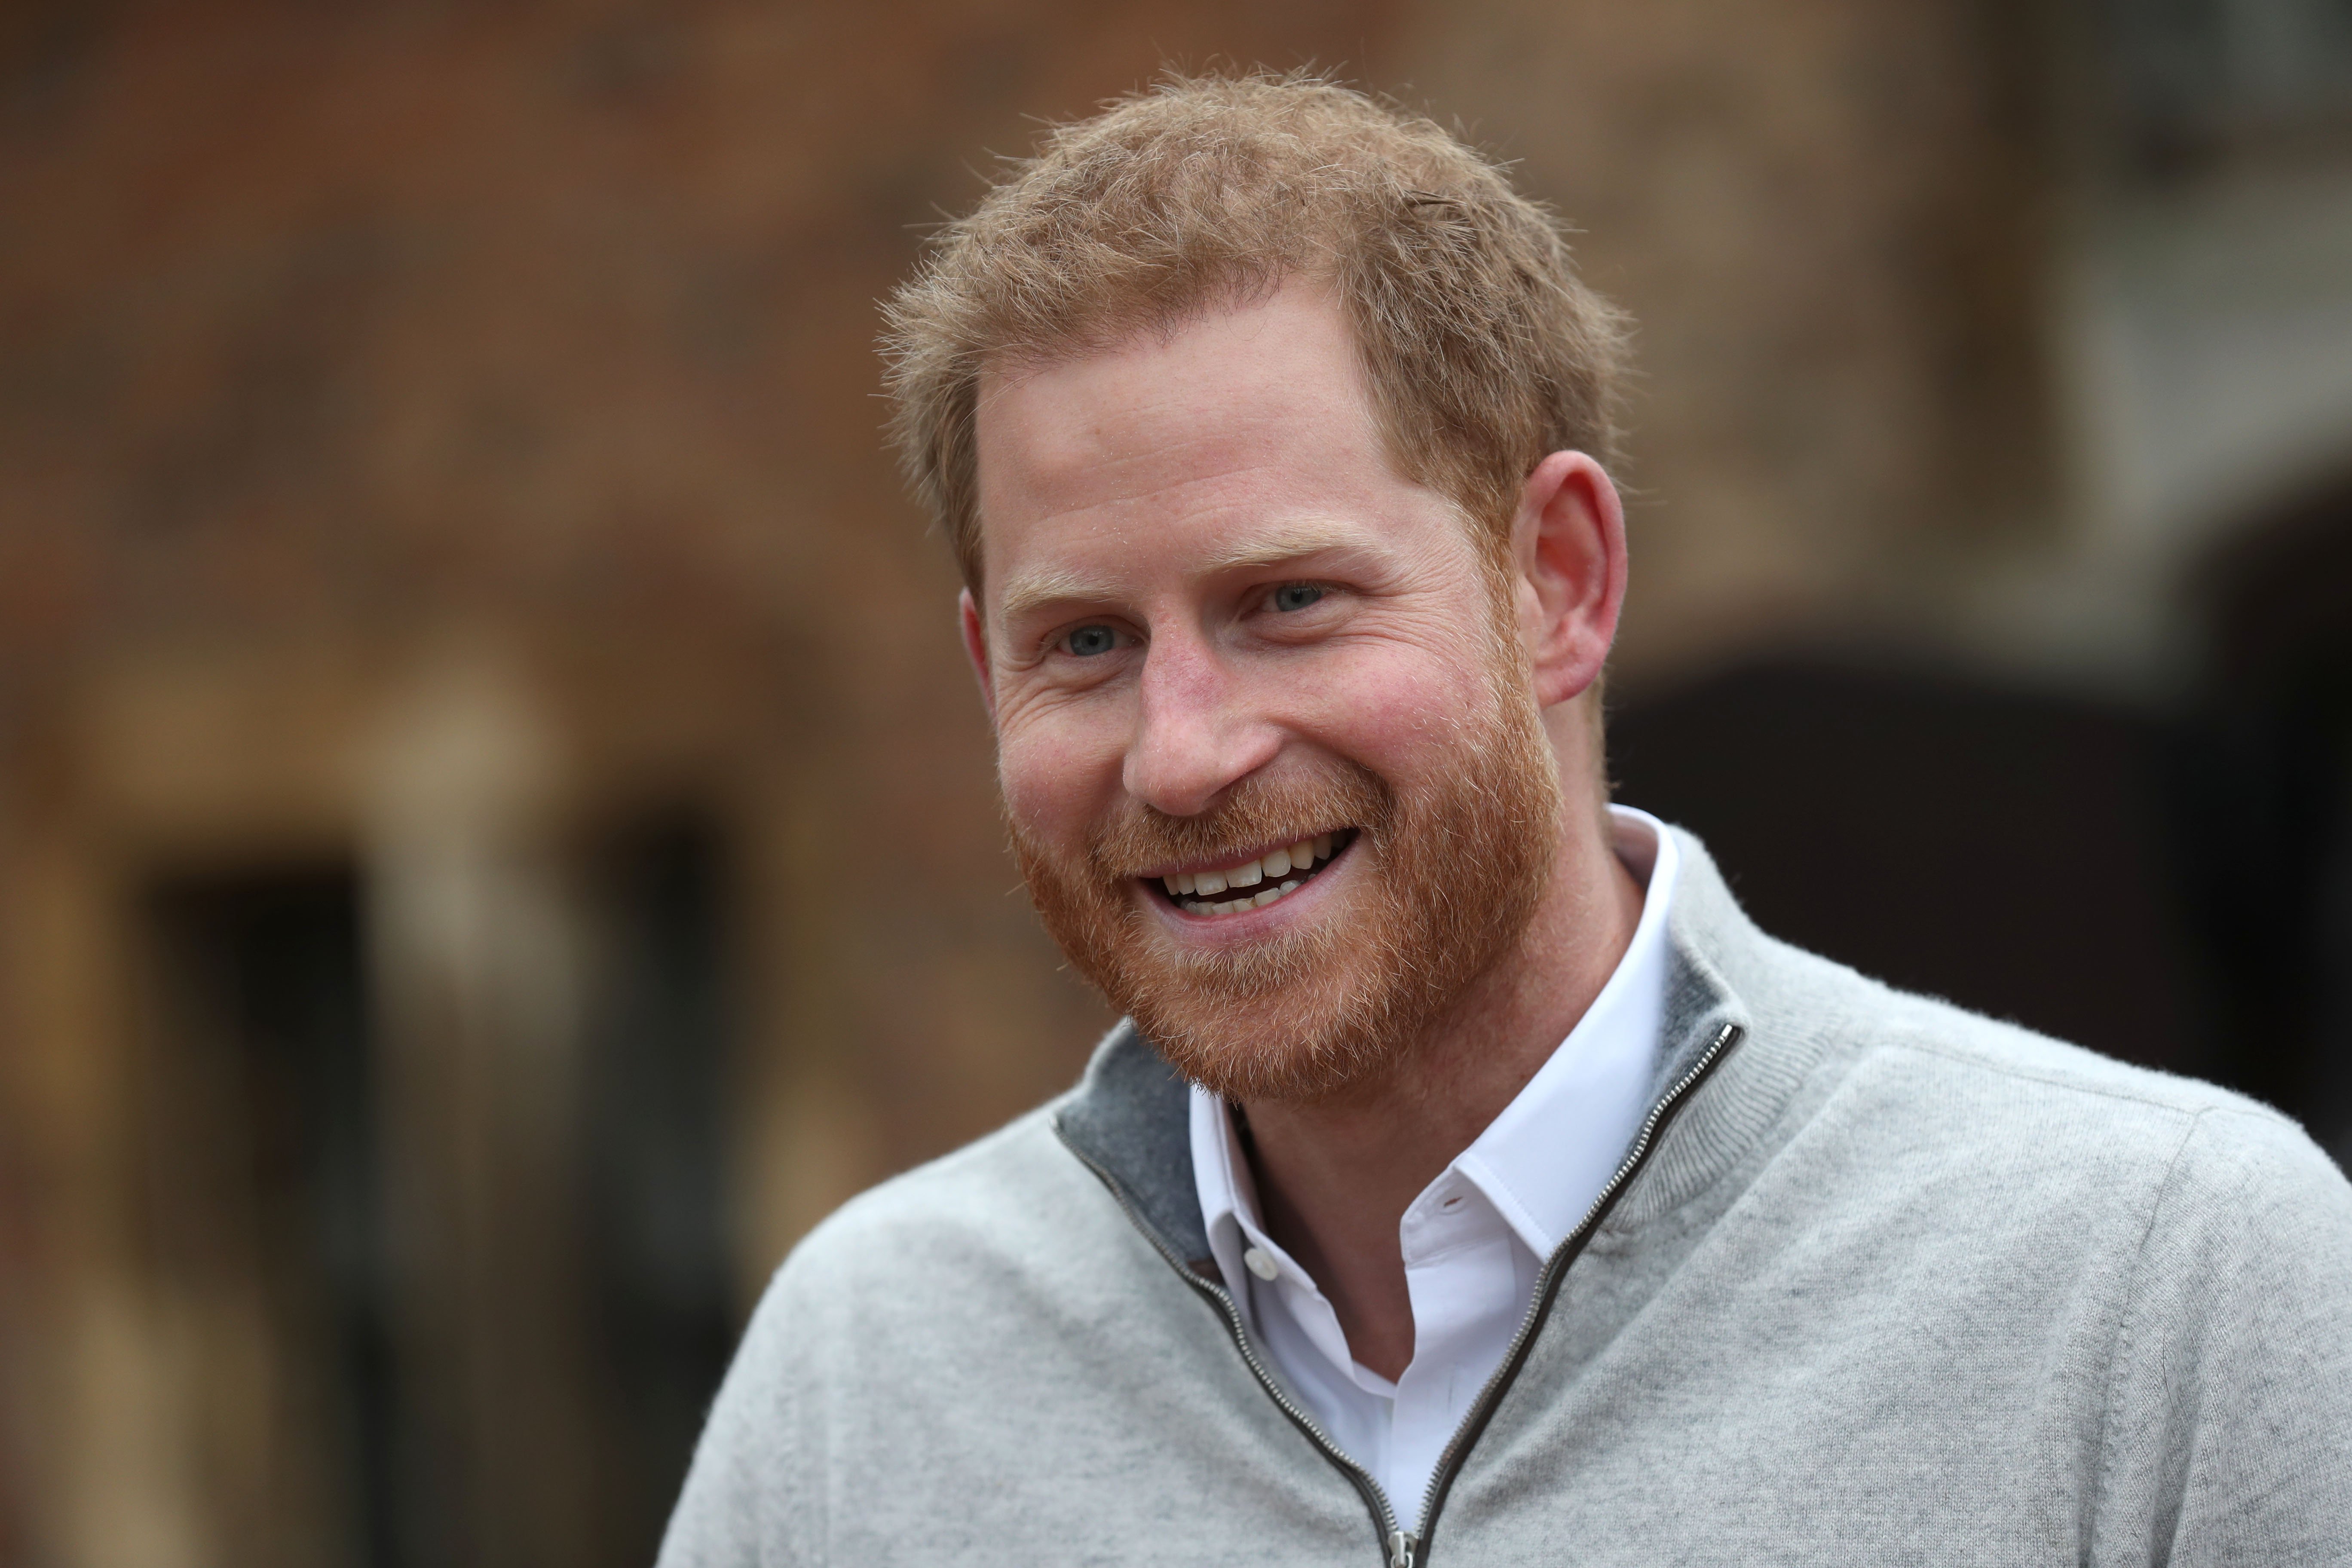 Prince Harry addressing the media Windsor Castle following the birth of his son | Photo: Getty Images